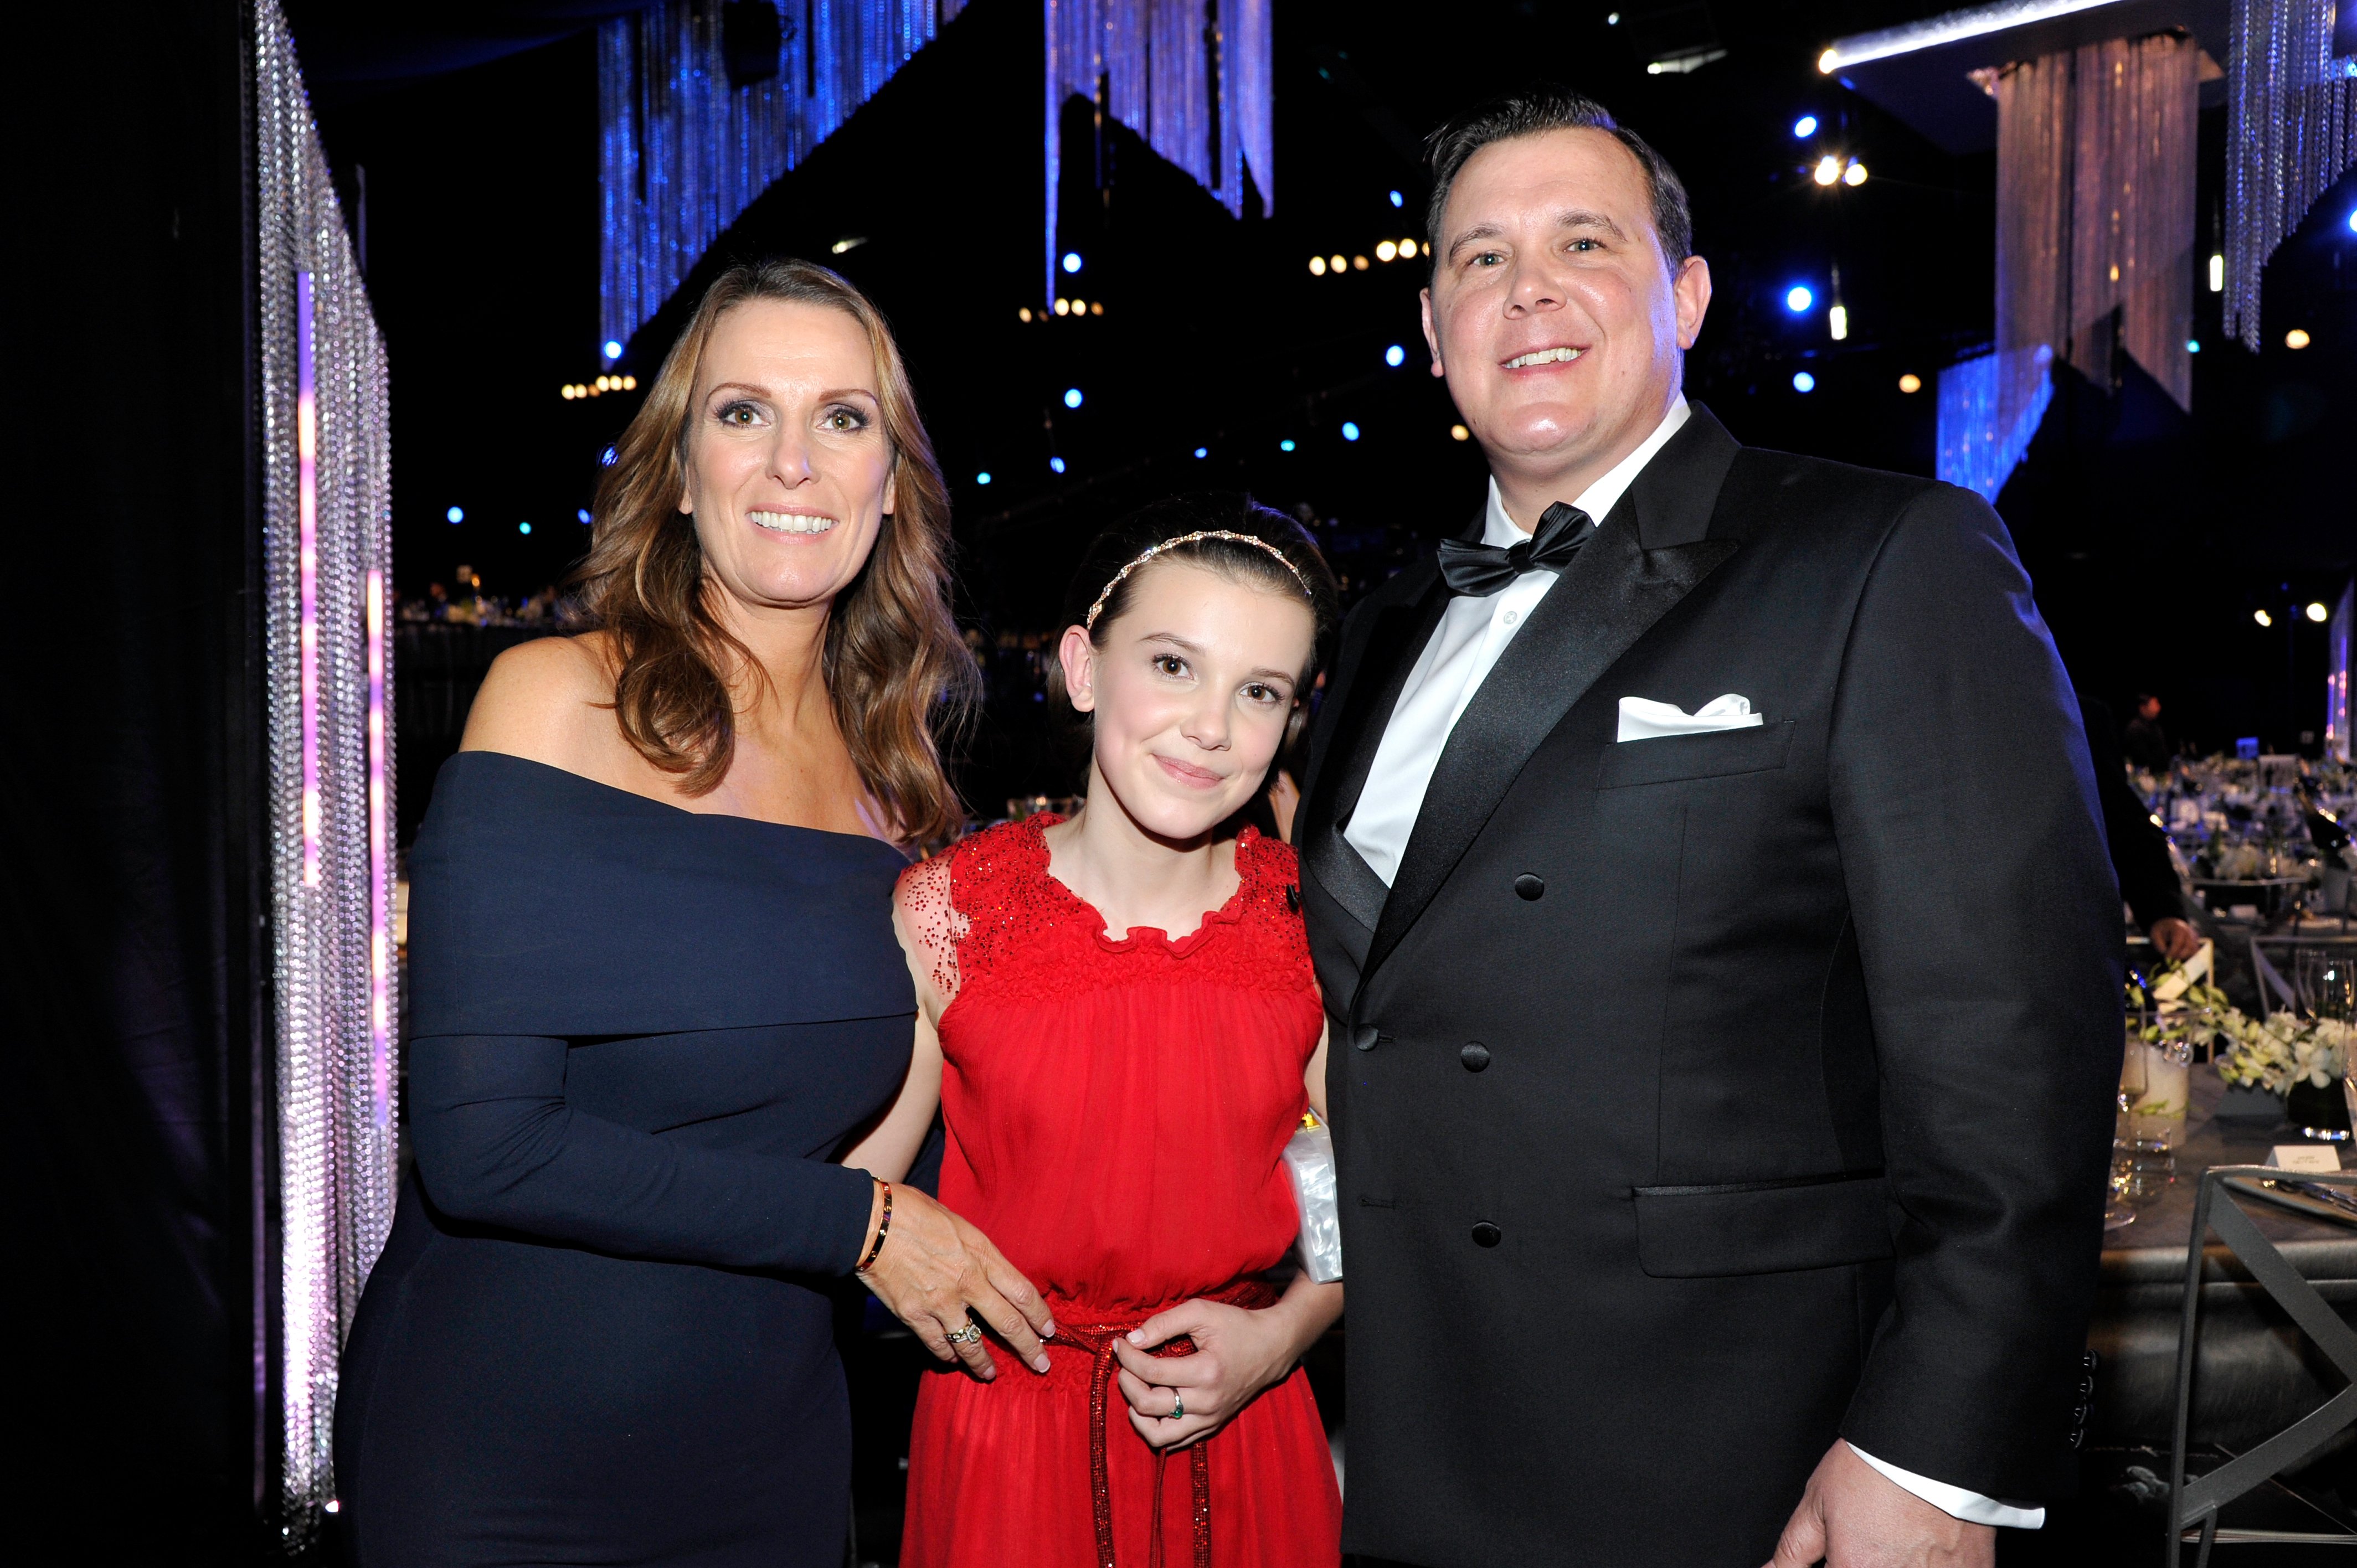 Actress Millie Bobby Brown (center) and her parents attend The 23rd Annual Screen Actors Guild Awards Cocktail Reception at The Shrine Auditorium, on January 29, 2017, in Los Angeles, California. | Source: Getty Images